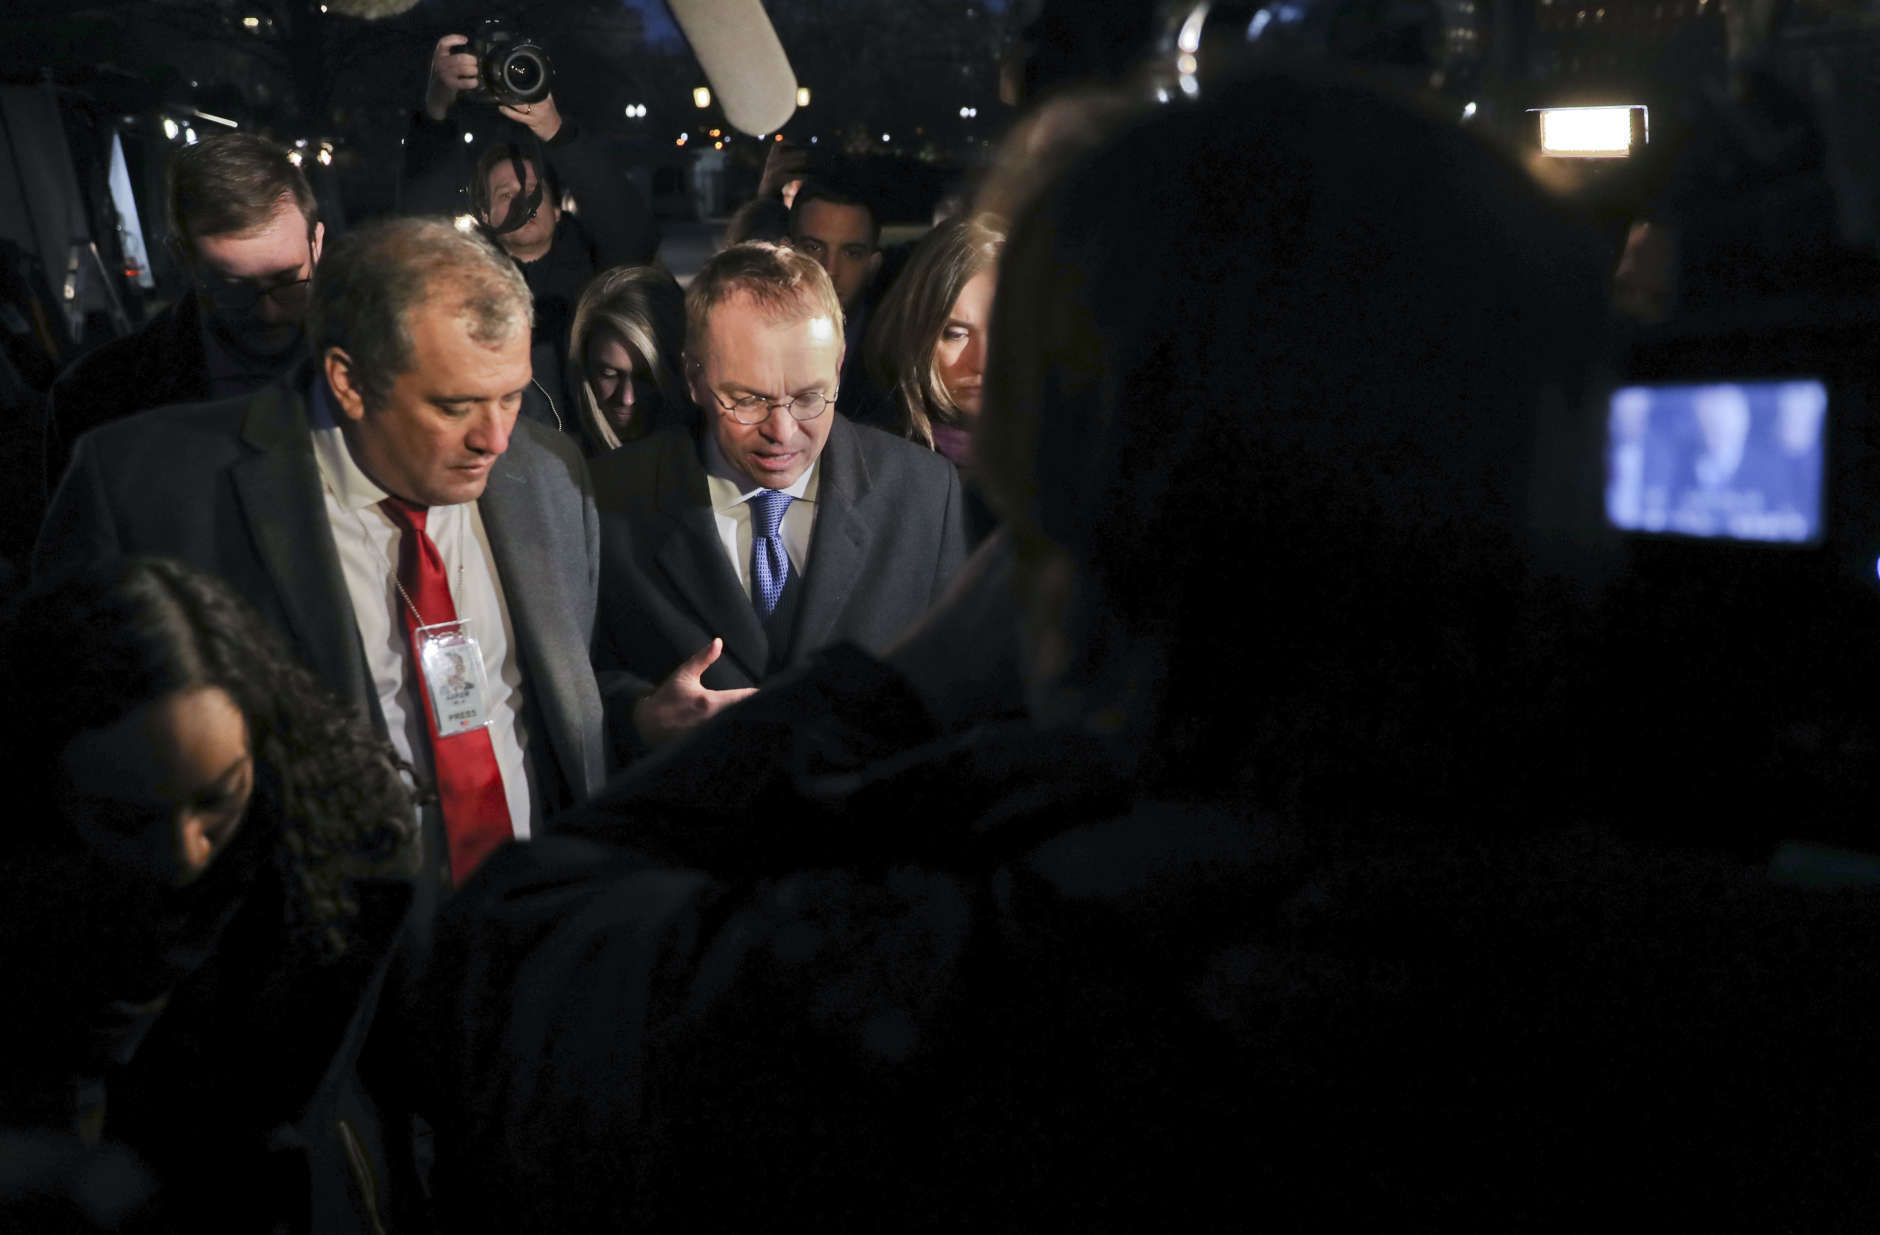 Director of the Office of Management and Budget Mick Mulvaney is surrounded by members of the media outside the White House, Friday, Jan. 19, 2018, and is questioned about a potential government shutdown this weekend. (AP Photo/Pablo Martinez Monsivais)